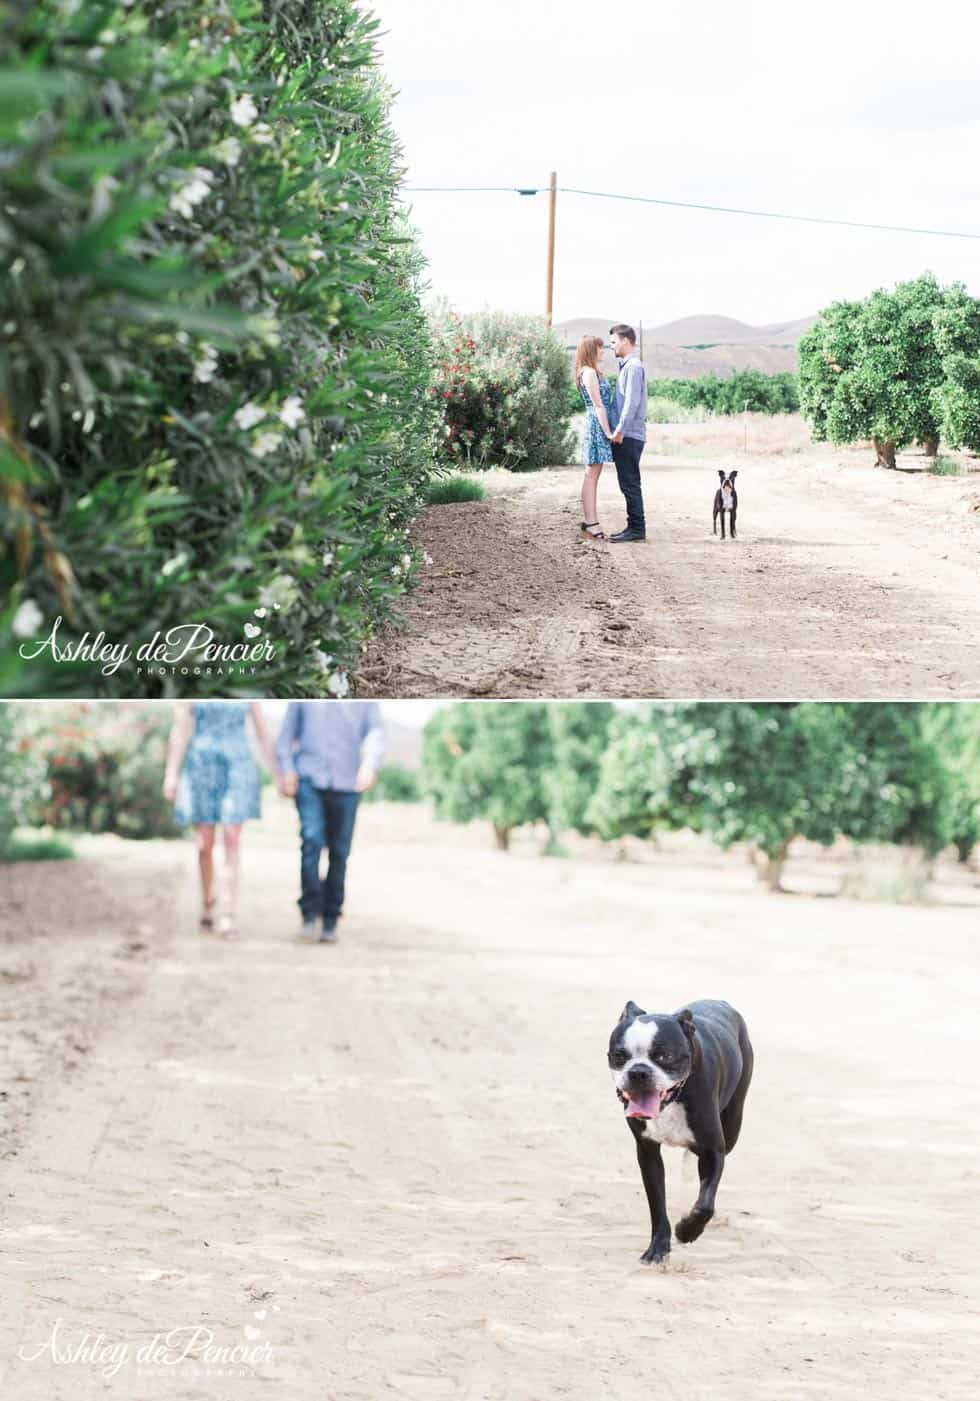 engagement portraits taken with a dog